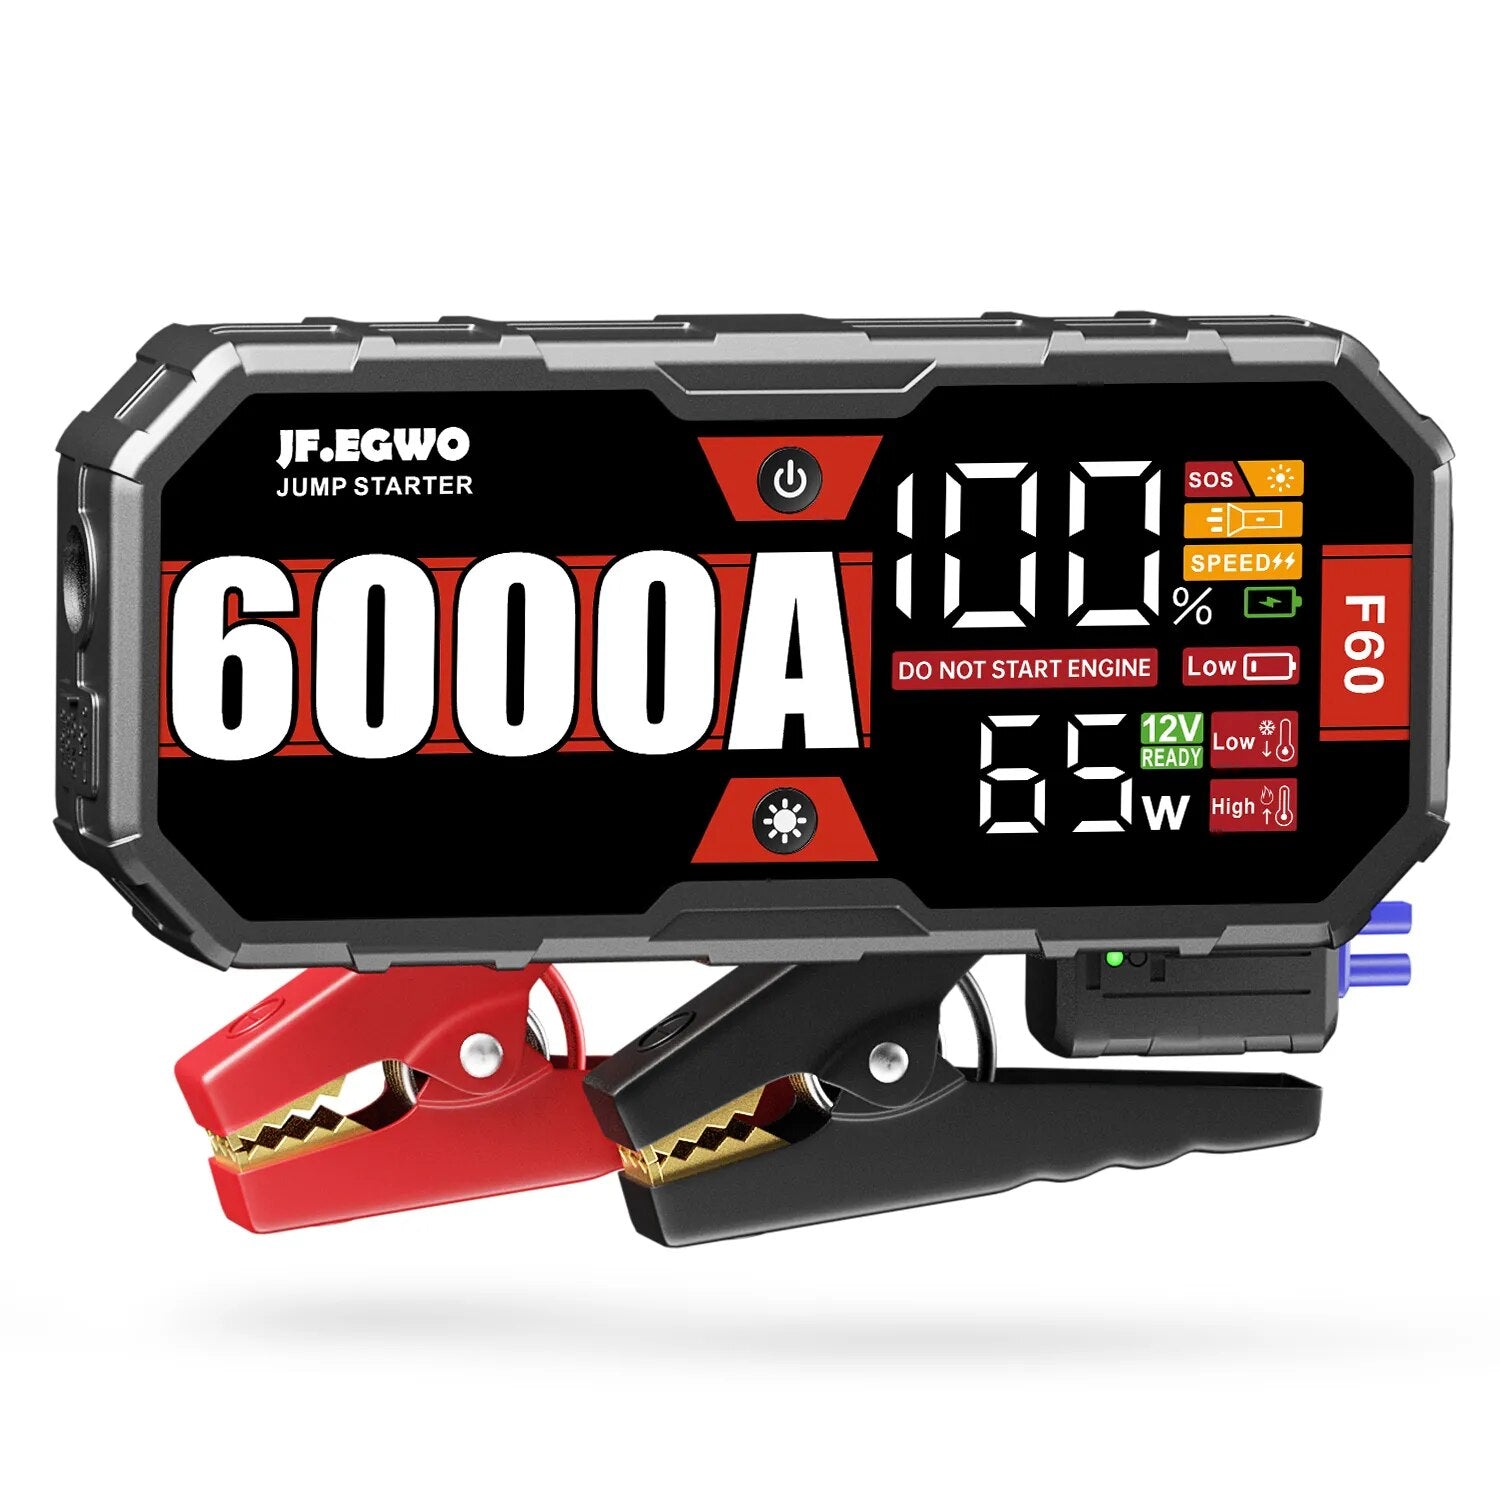 6000A Jump Starter Power Bank Car Booster Battery Portable Charger motorcycle Auto Starting Device Emergency PD65W 12V 30000mah